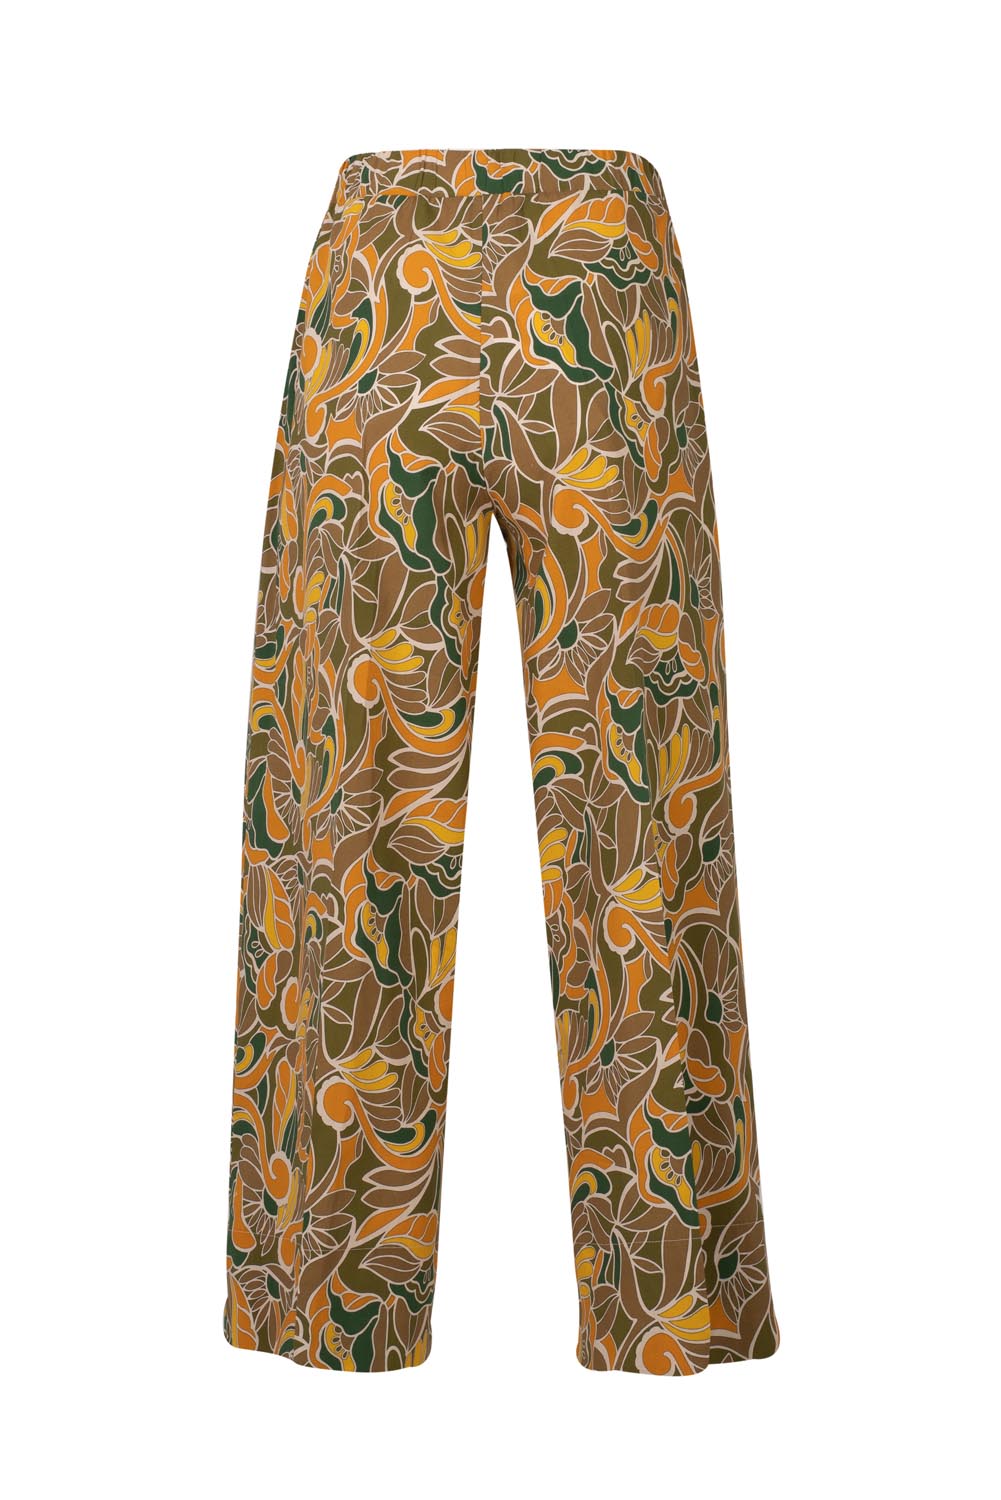 Cropped Printed Trousers with Elasticated Front “Raffia” Effect Waistband